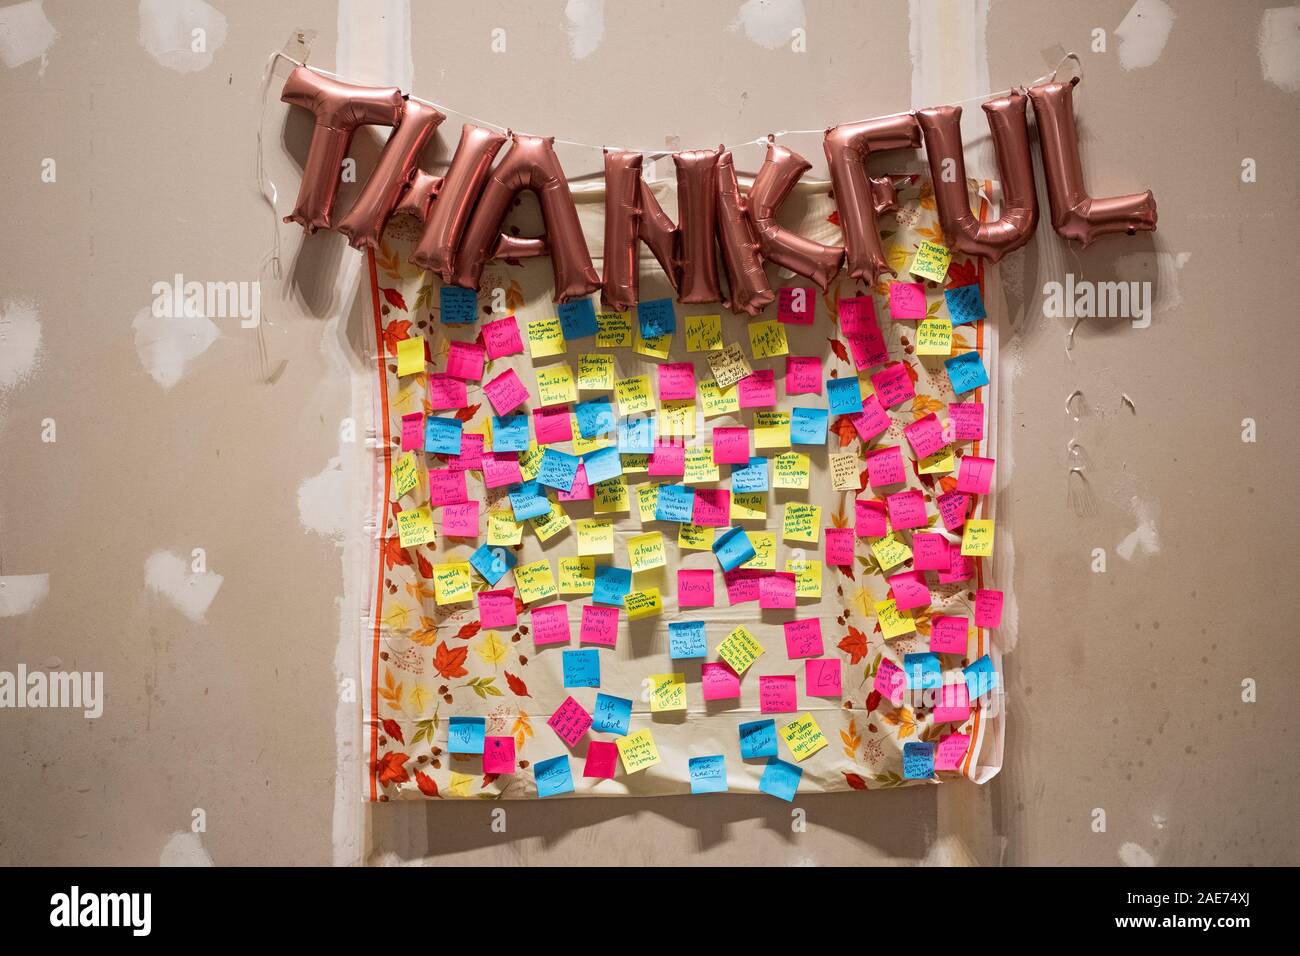 Around the Thanksgiving holiday, a Starbucks on Park Ave & . 34th St. had post-it notes from customers about what they are thankful for & wishing for. Stock Photo